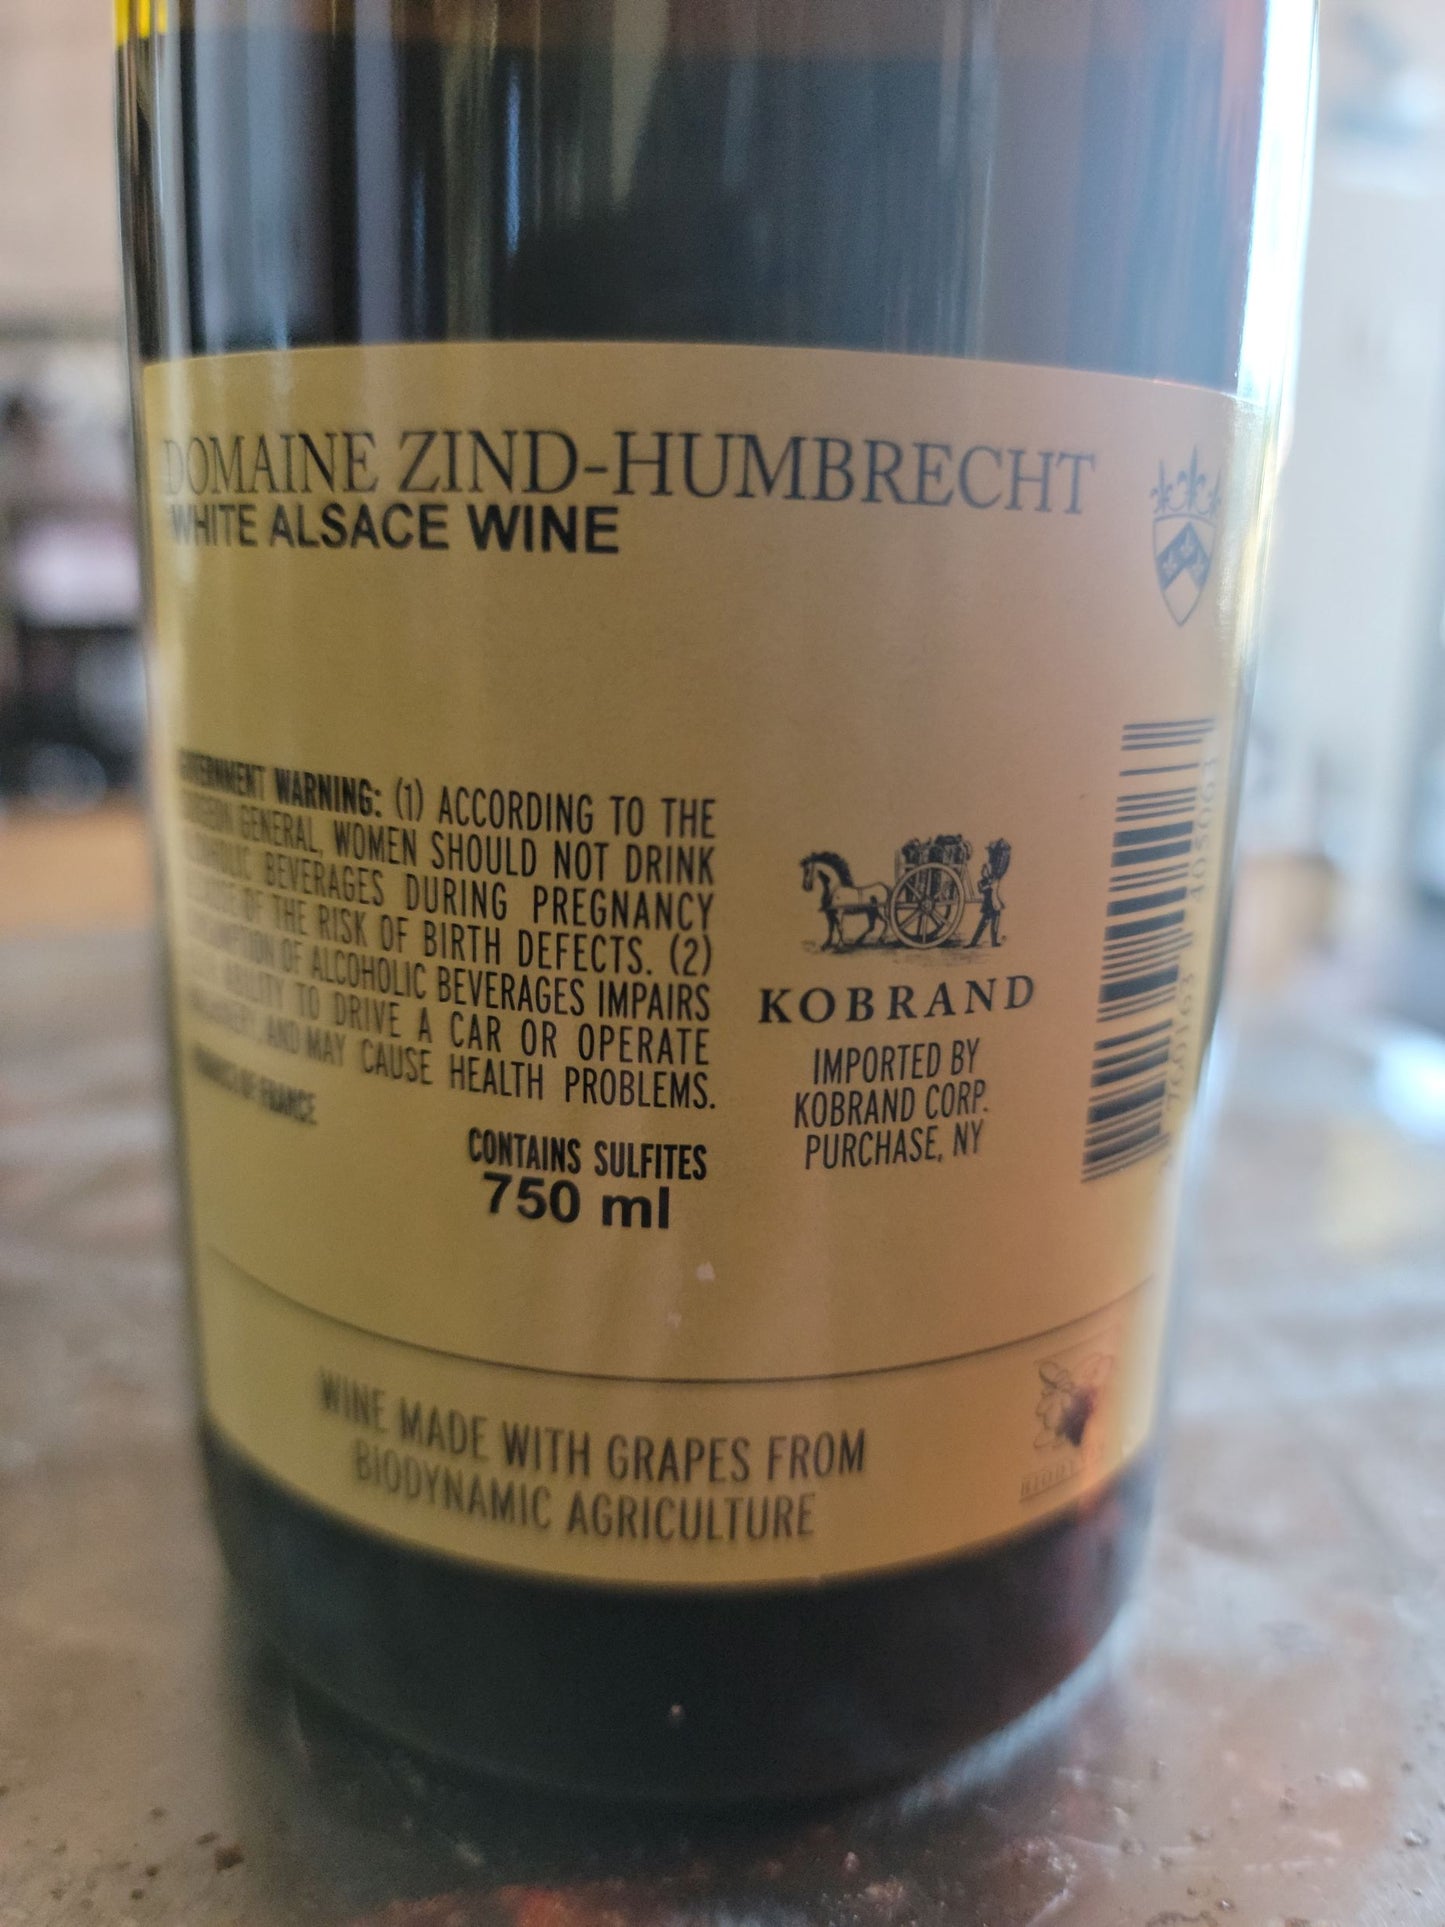 DOMAINE ZIND-HUMBRECHT 2020 Riesling 'Clos Hauserer' (Alsace, France)